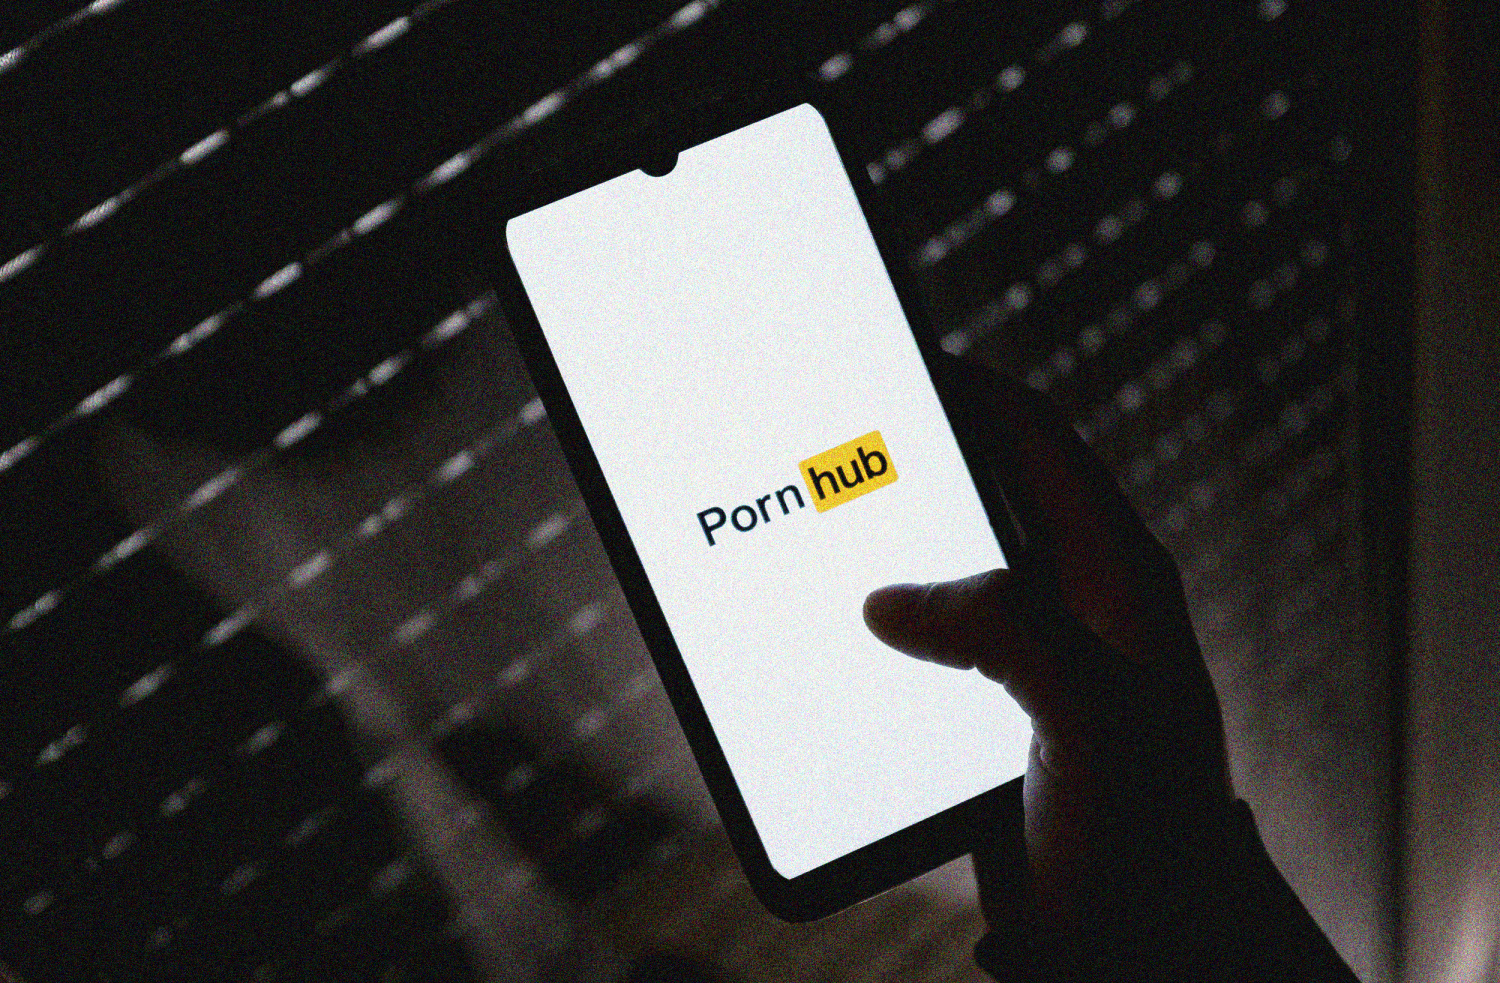 Pron Hup Com - Meet Pornhub's new owner: Ethical Capital Partners